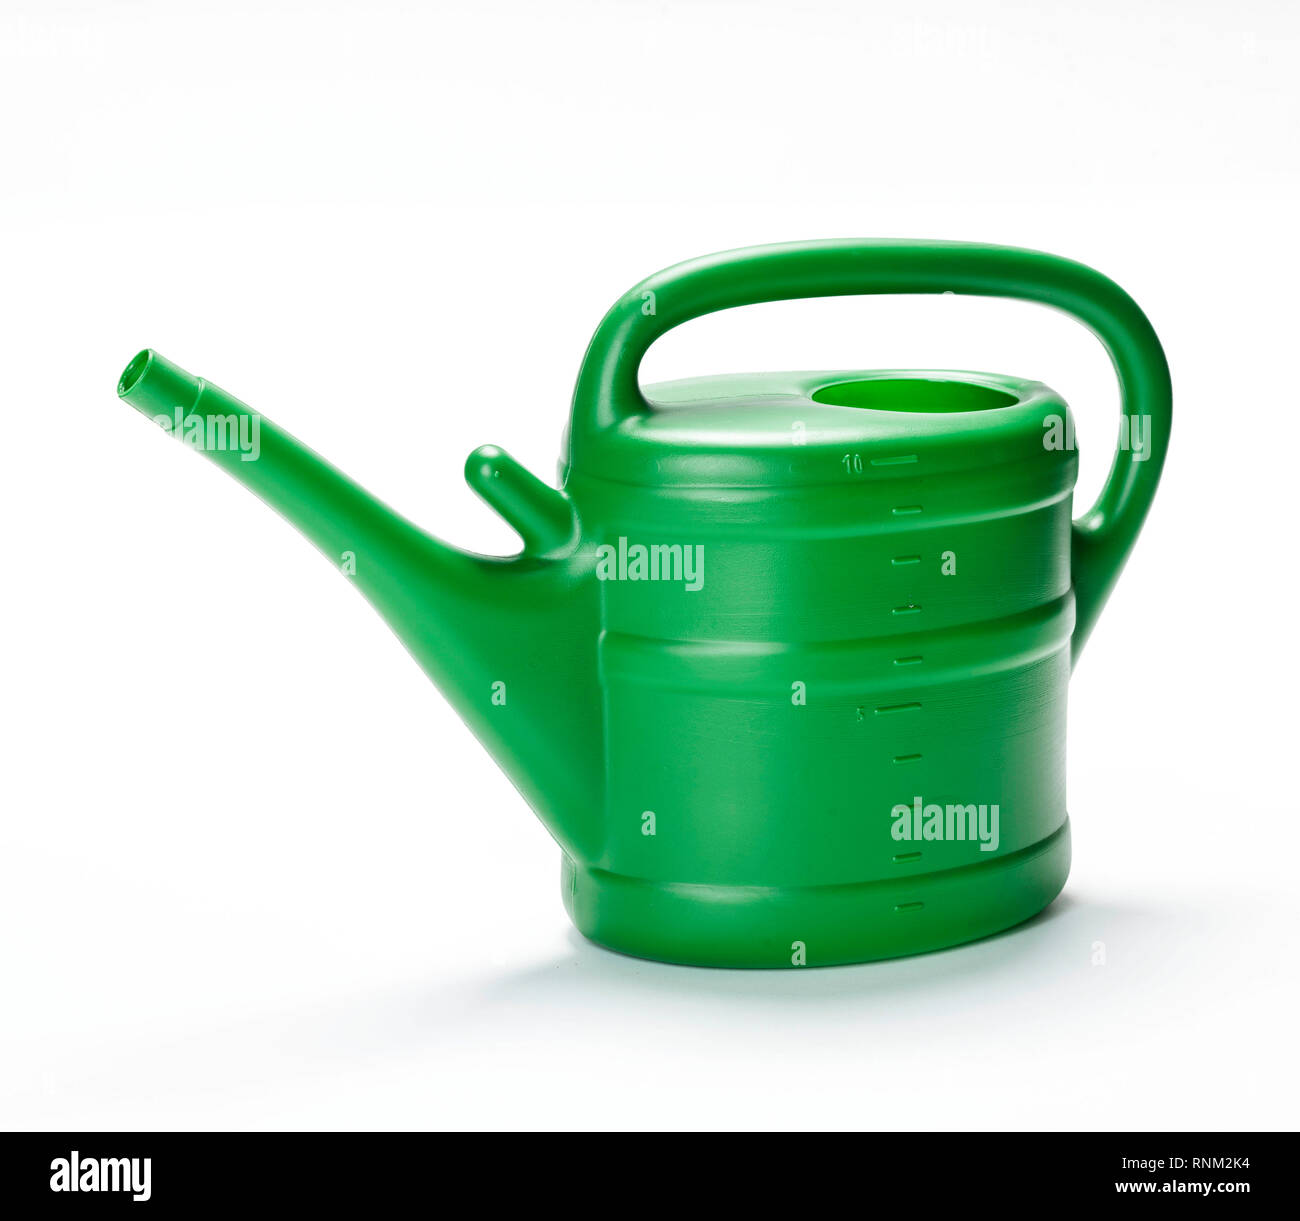 Green watering can made of plastic. Studio picture against a white background. Stock Photo